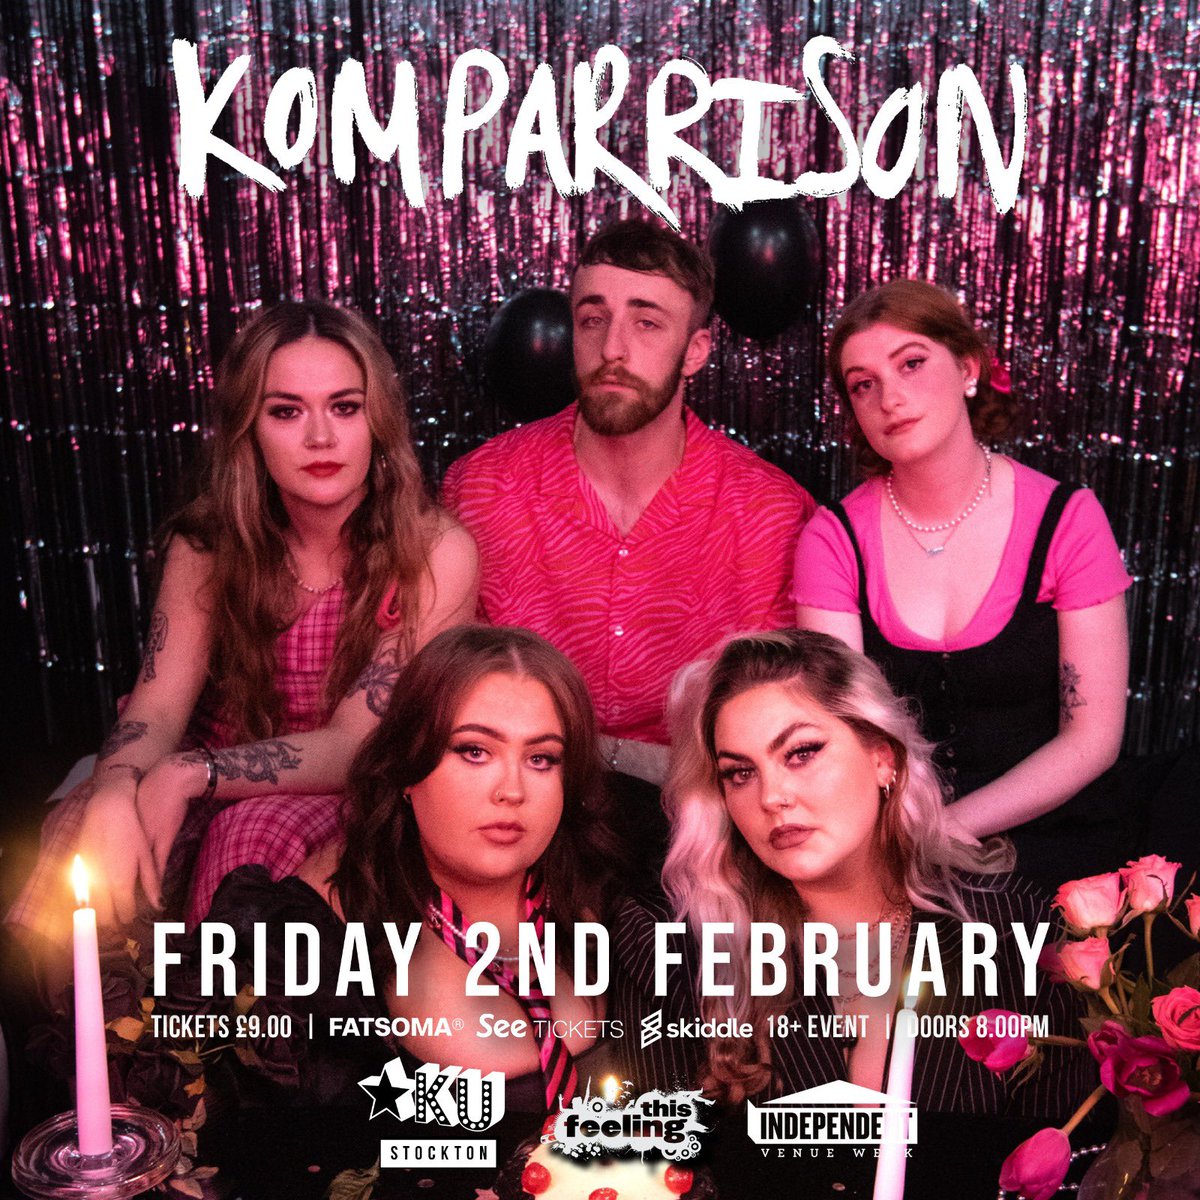 Tickets for our Independent Venue Week show with Komparrison this February are on sale now 💥 🎫 fatsoma.com/e/iae1fj9v/la/…